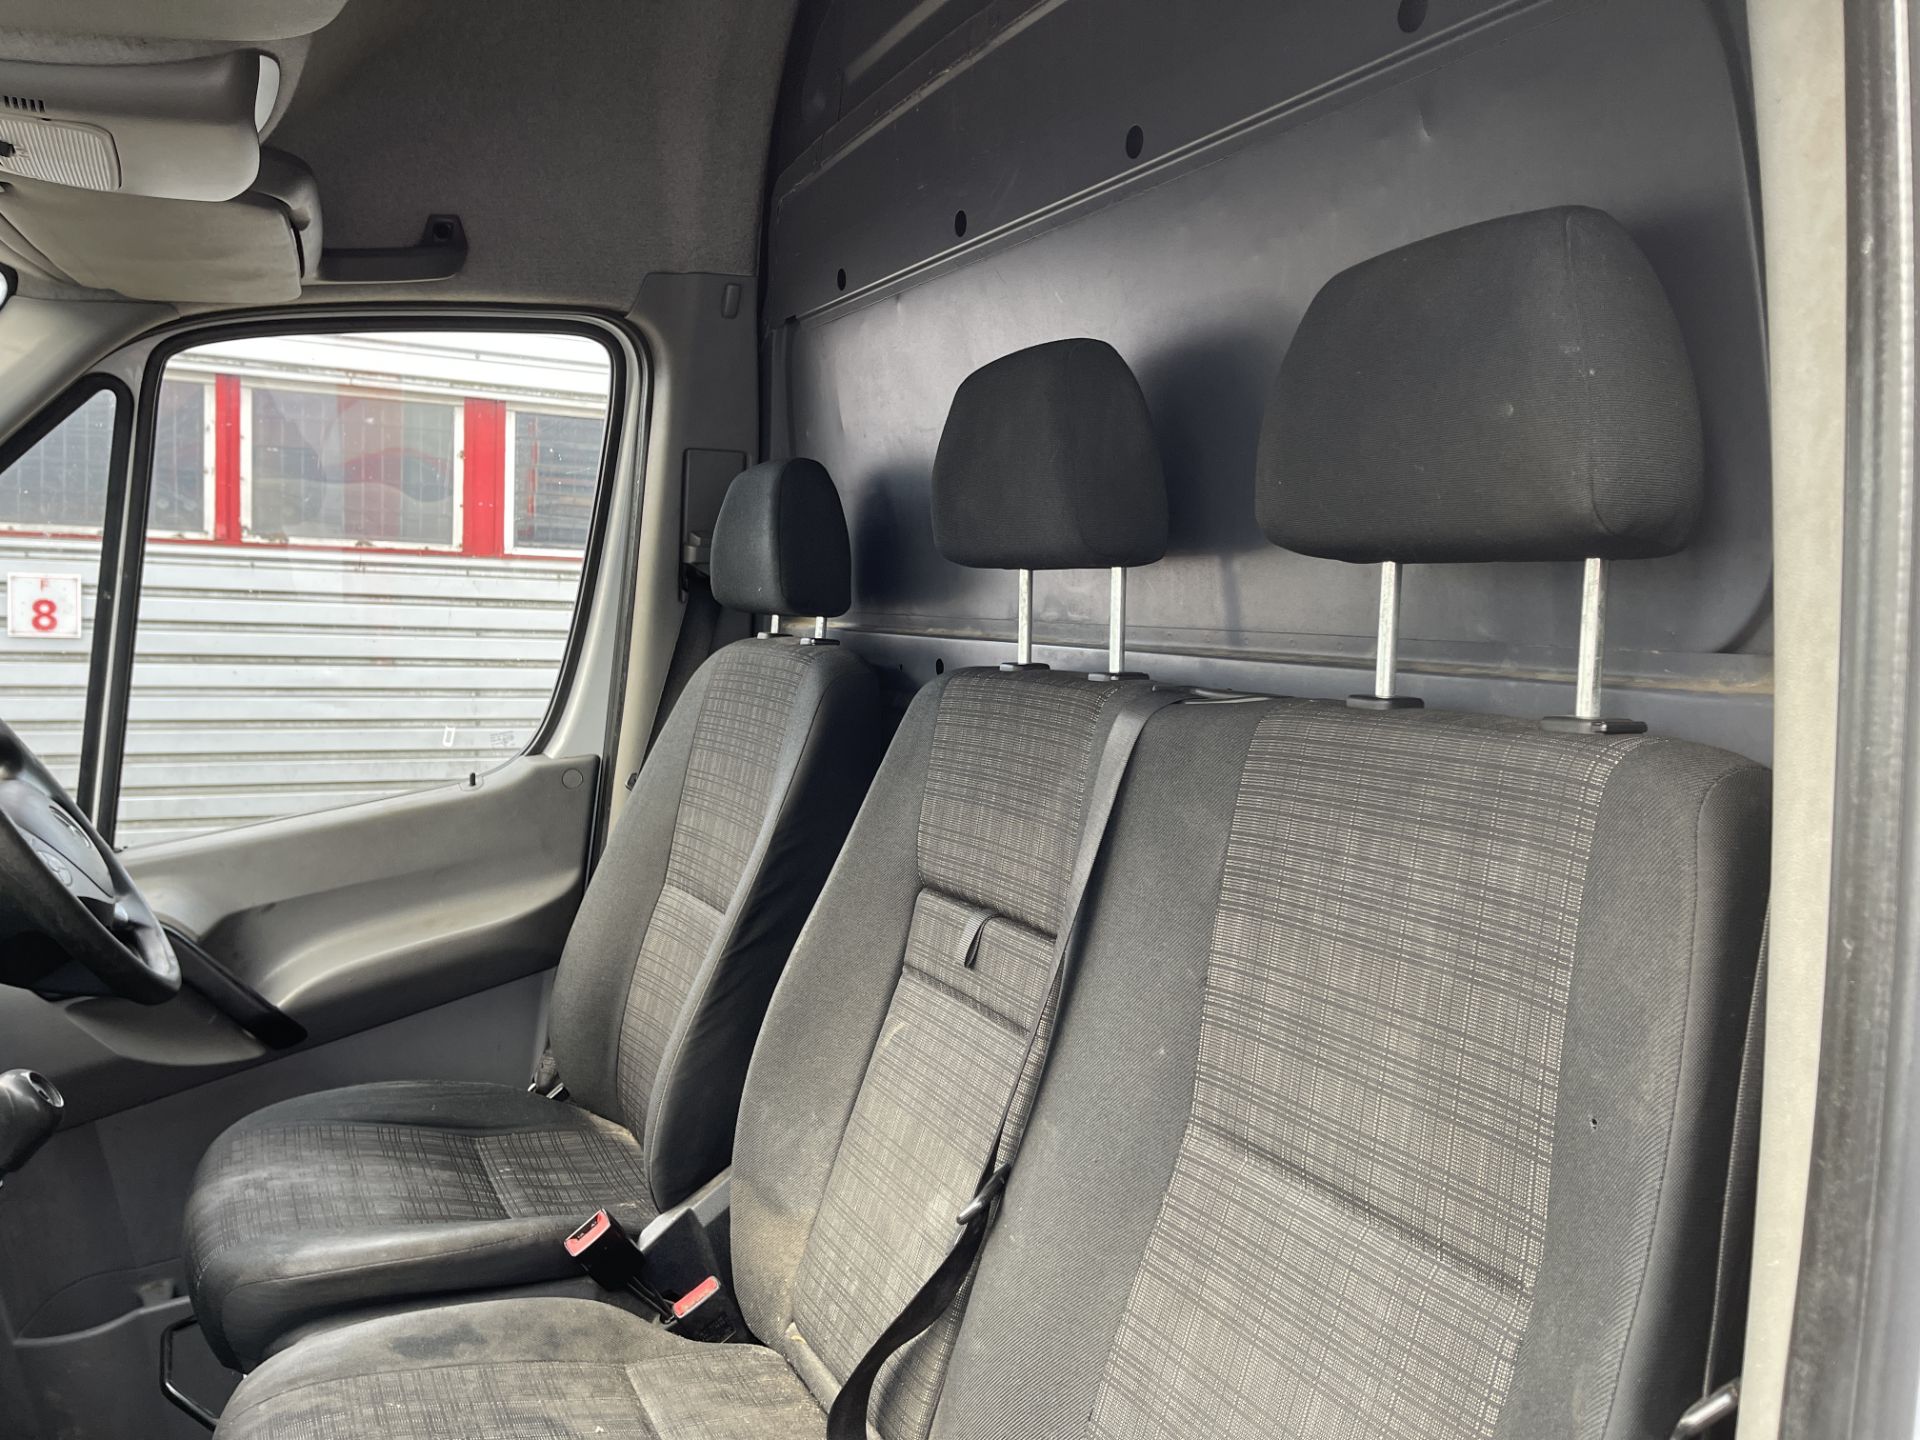 2014 - Mercedes Sprinter MWB - Facelift Model - Low Miles for Age - Image 35 of 39